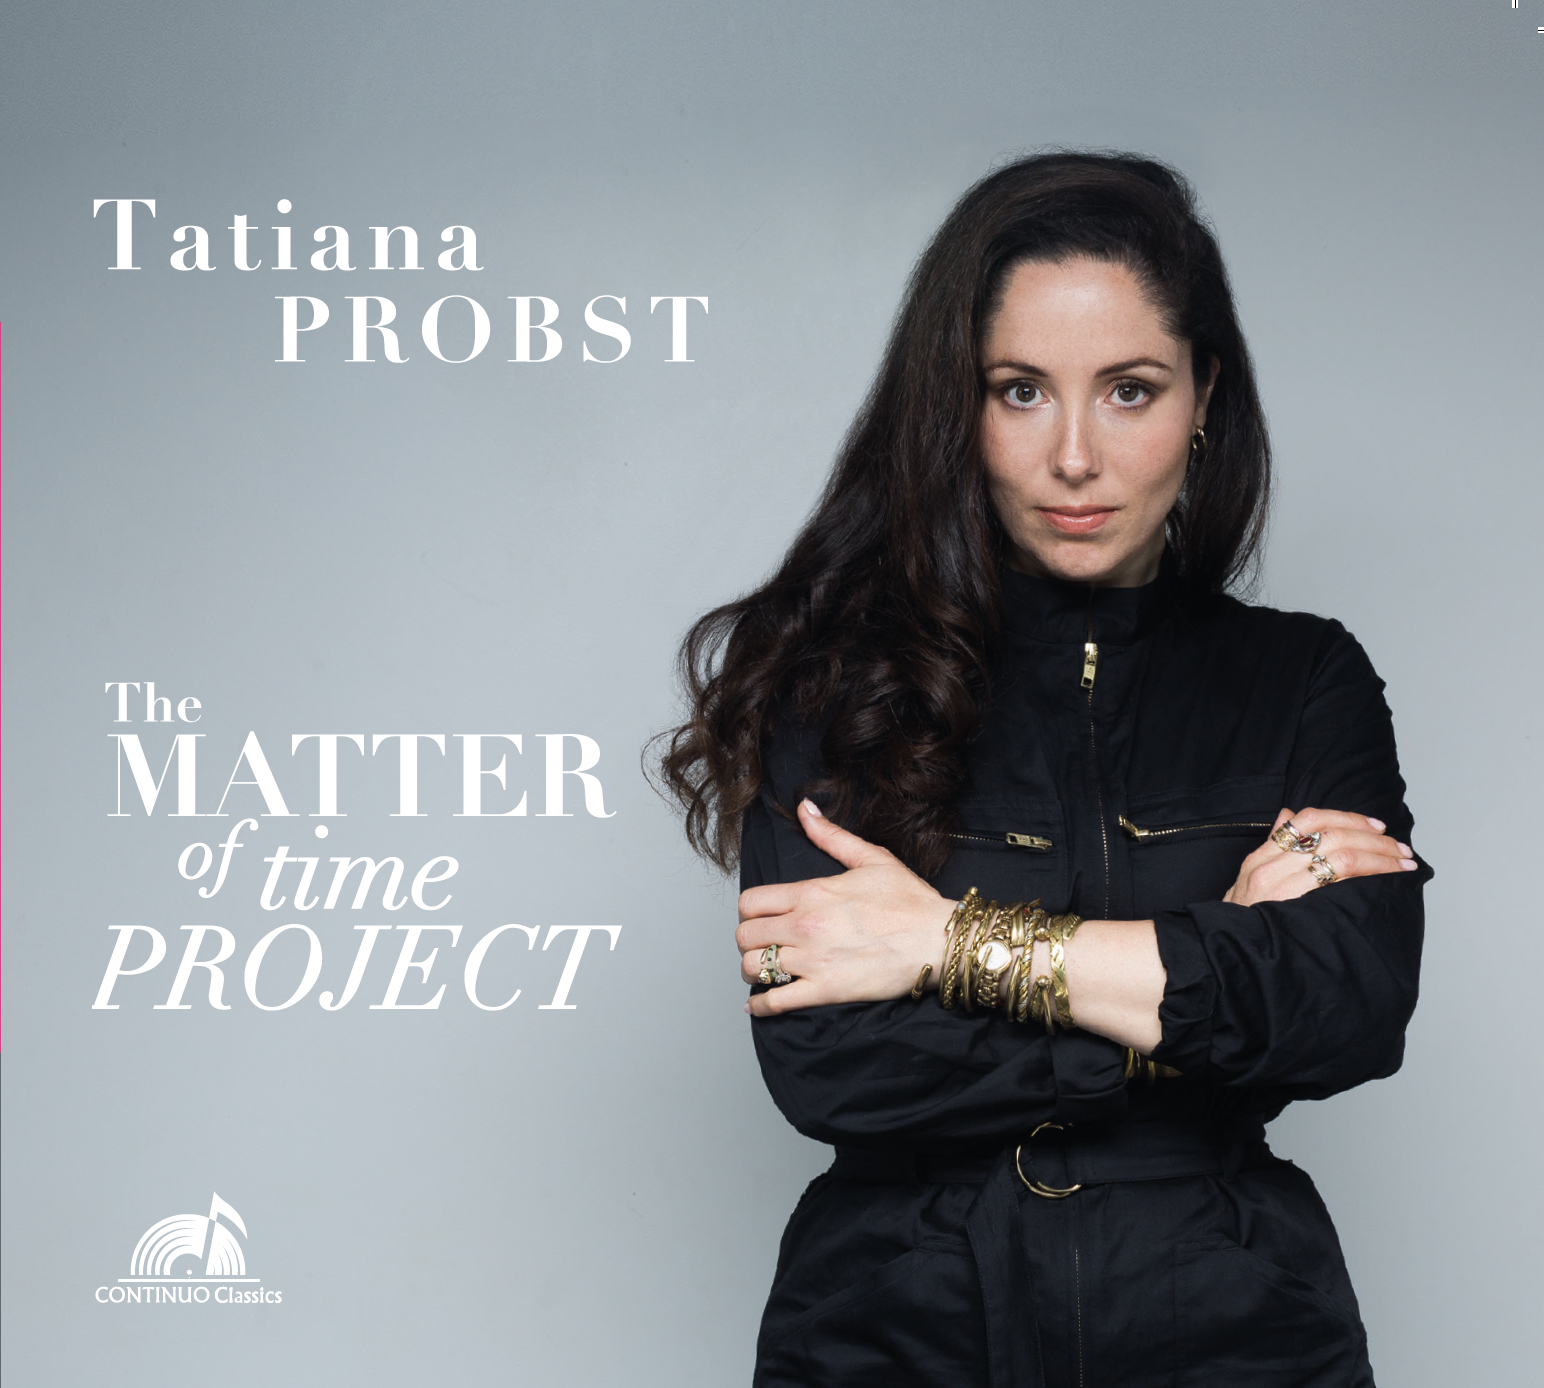 The Matter of Time Project / Tatiana Probst